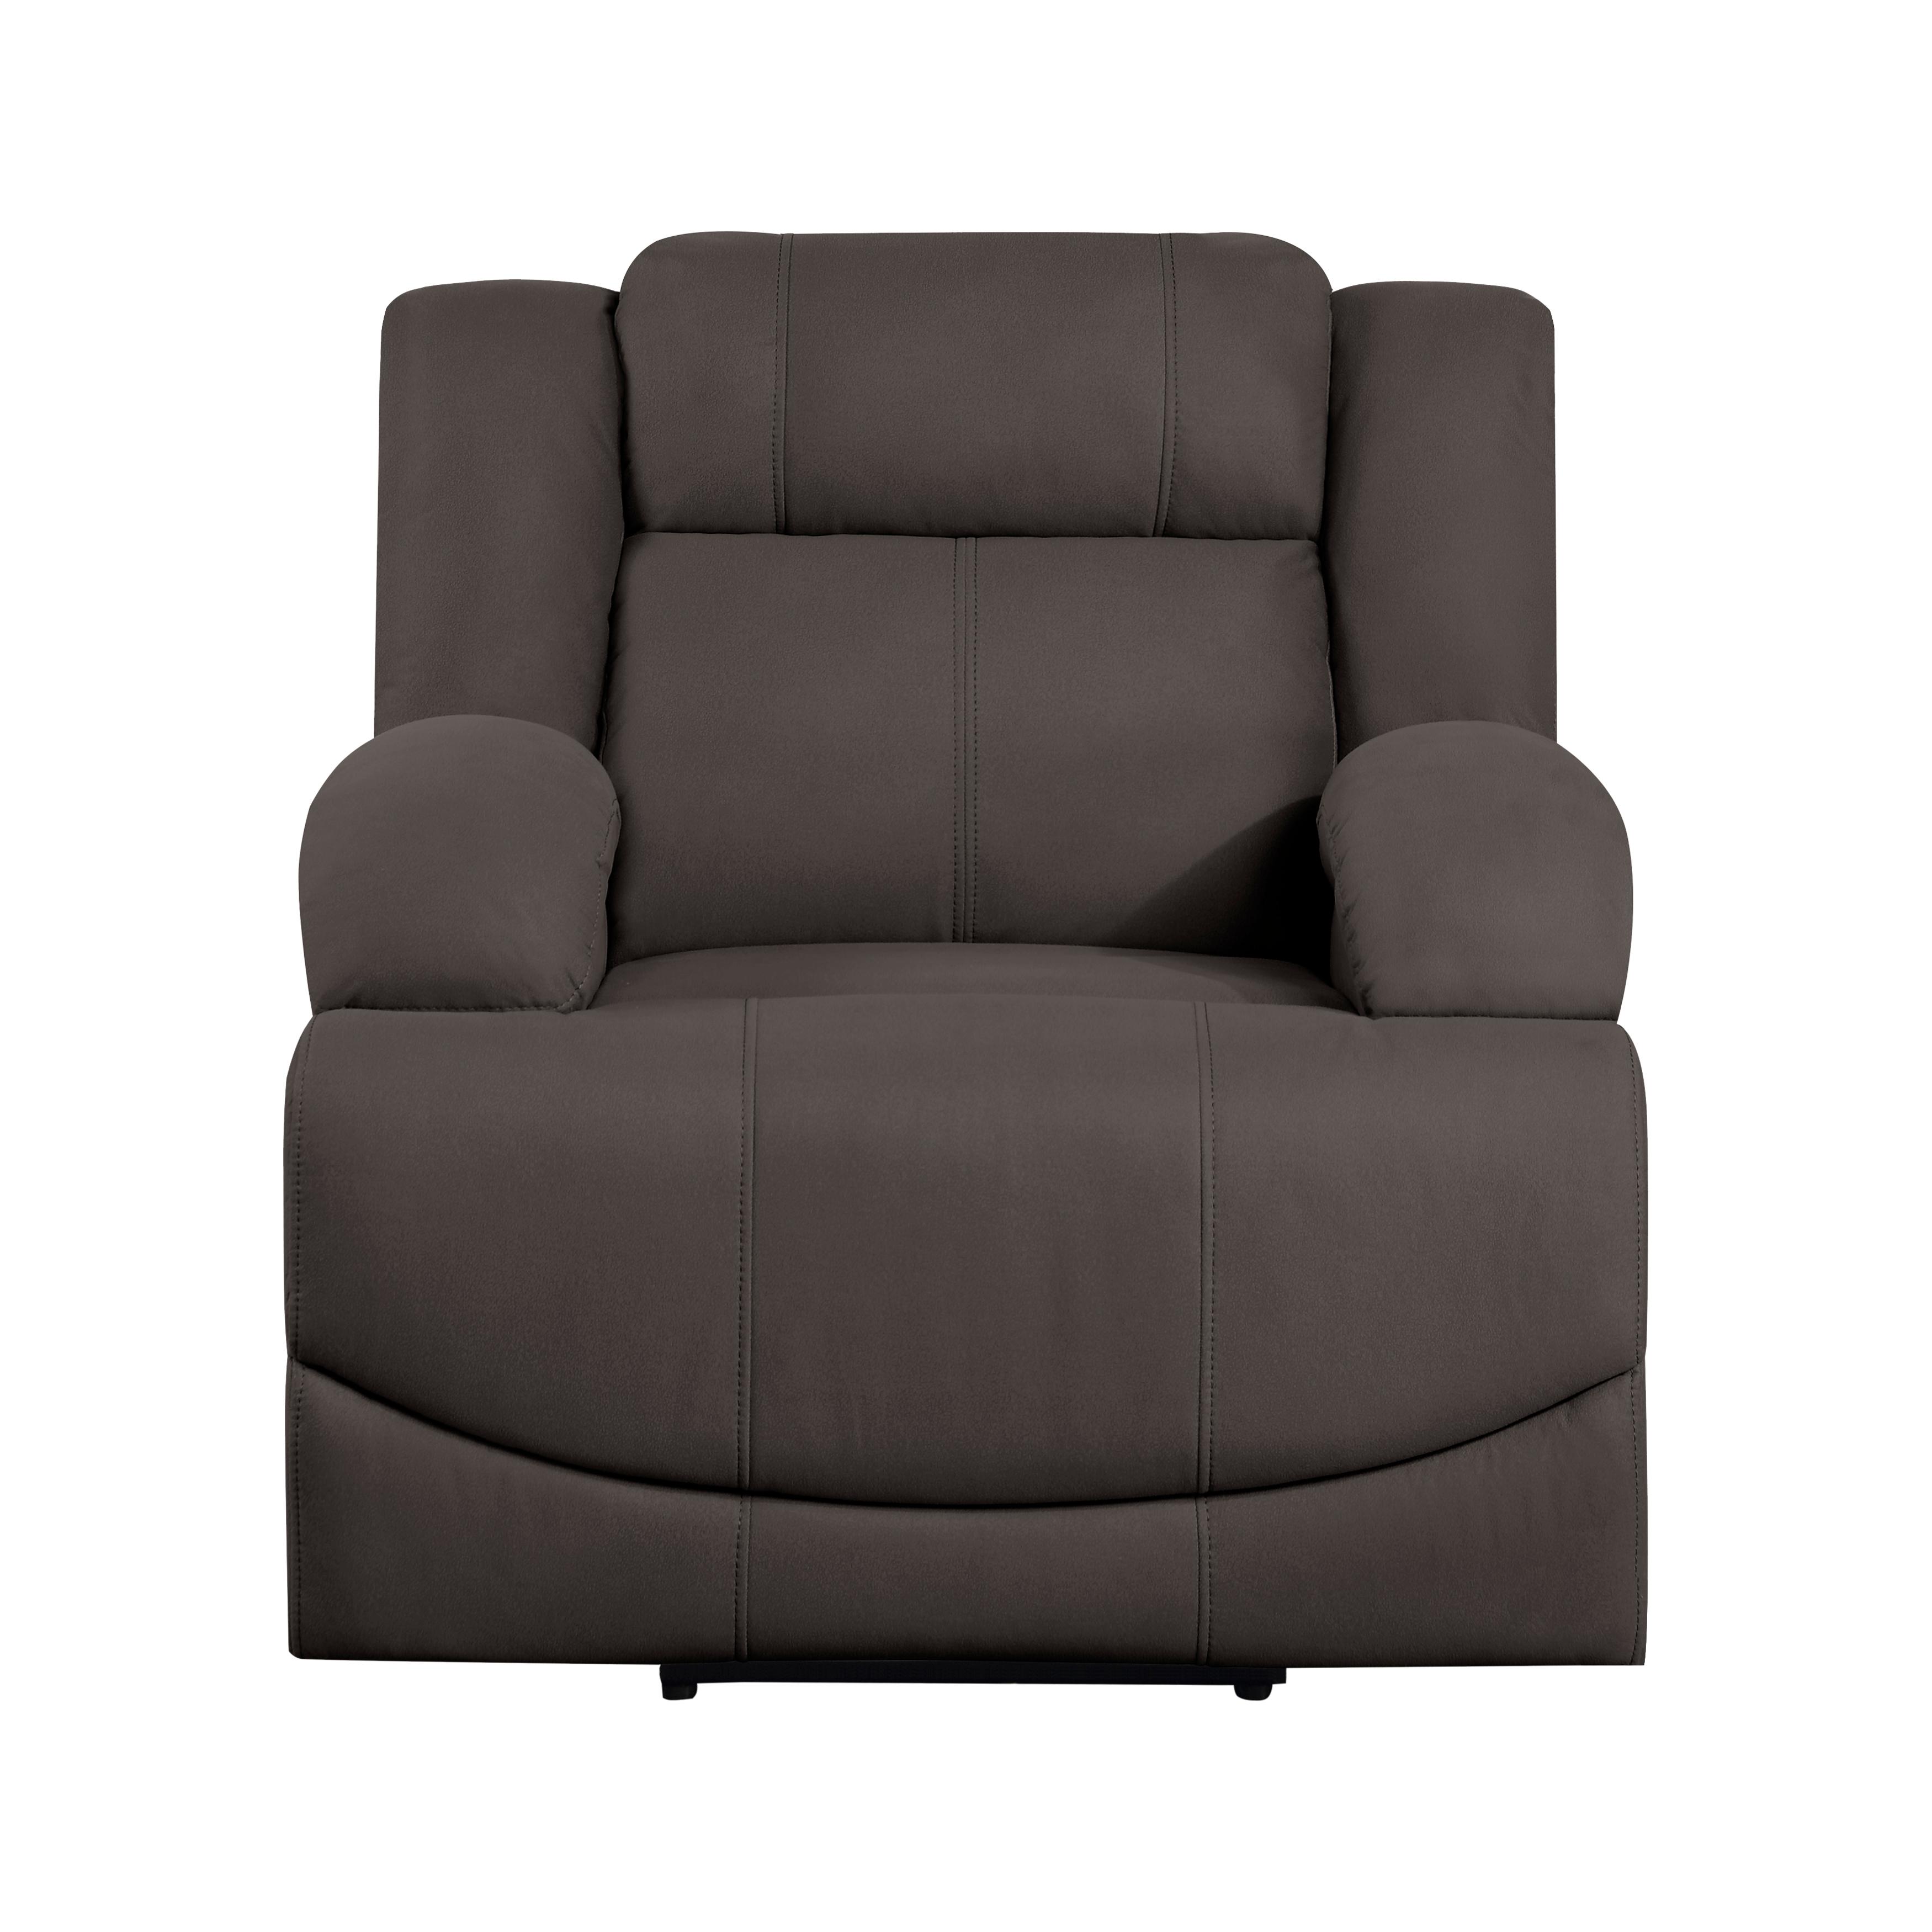 Transitional Power Reclining Chair 9207CHC-1PW Camryn 9207CHC-1PW in Chocolate Microfiber